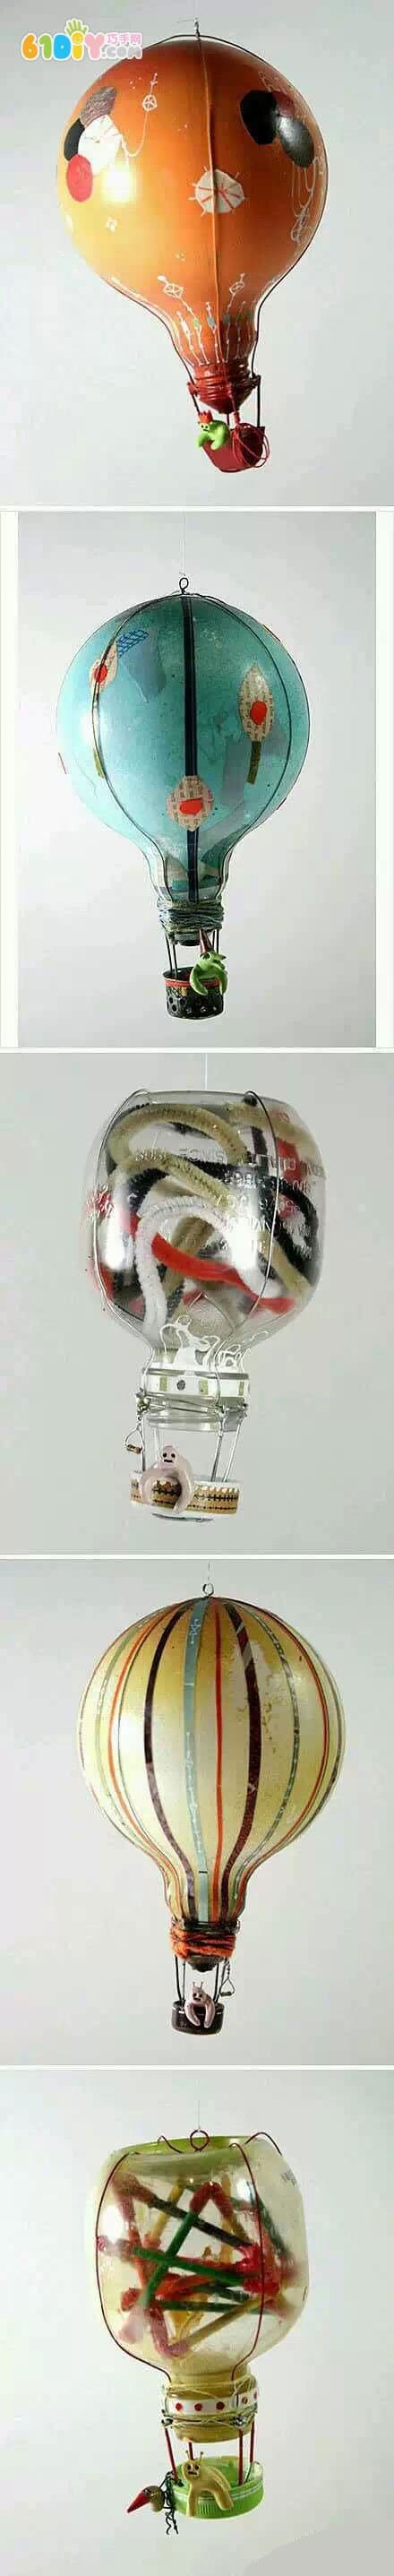 Old light bulb and small bottle making cartoon hot air balloon